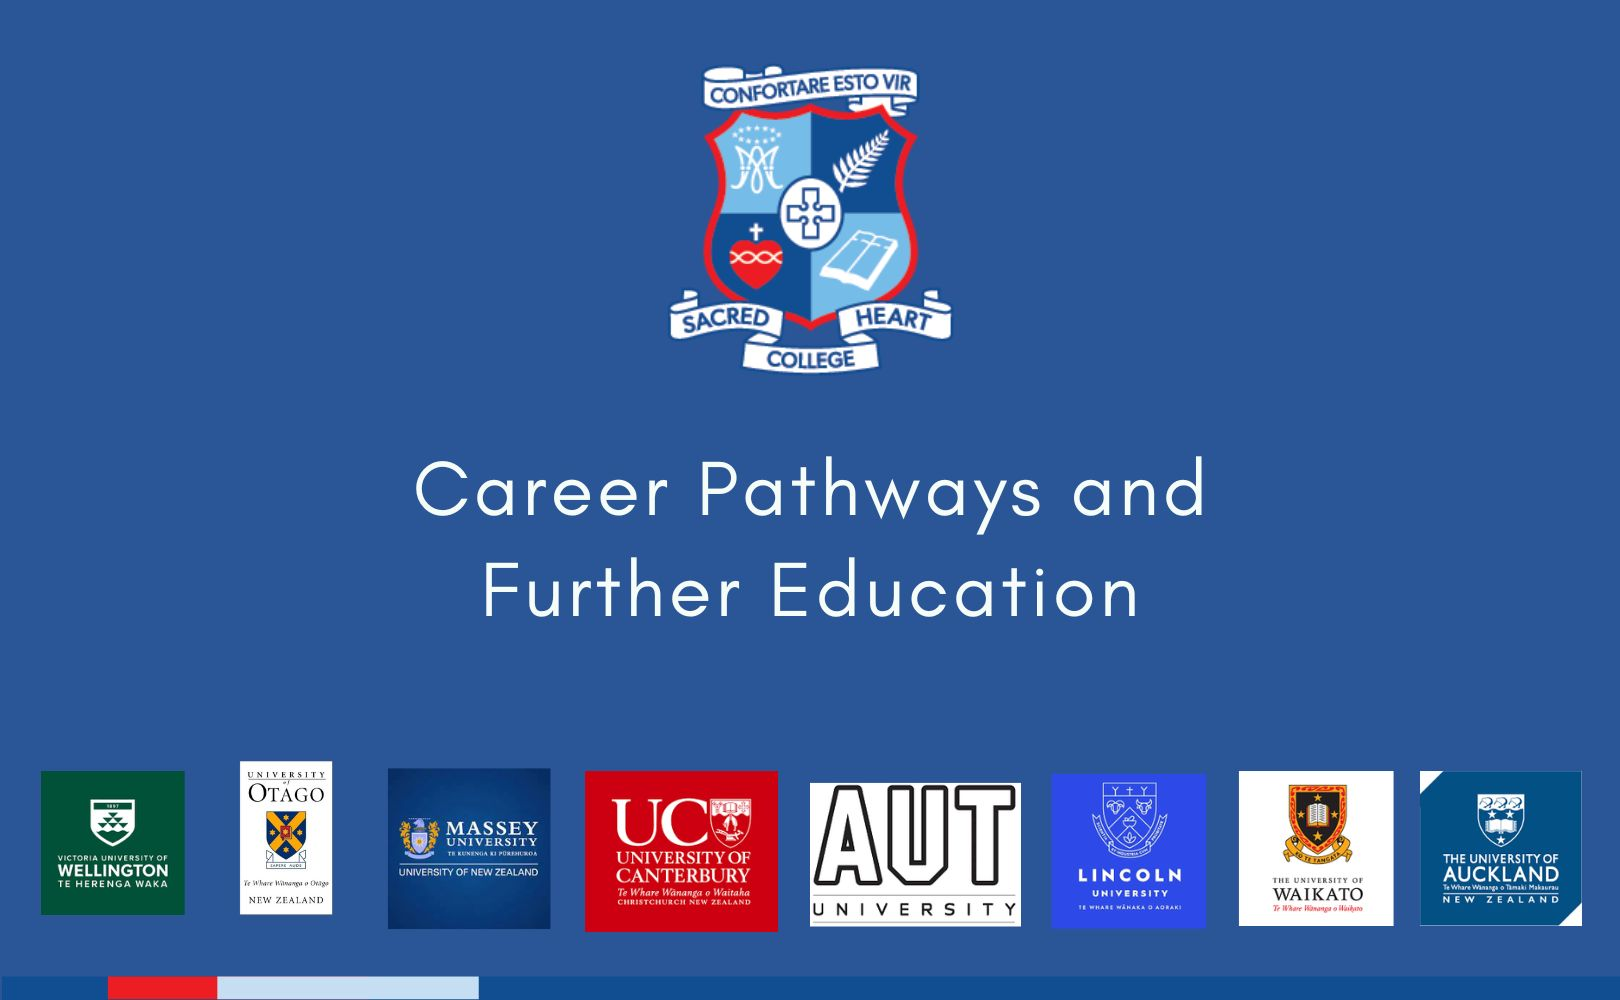 Career Pathways and Further Education